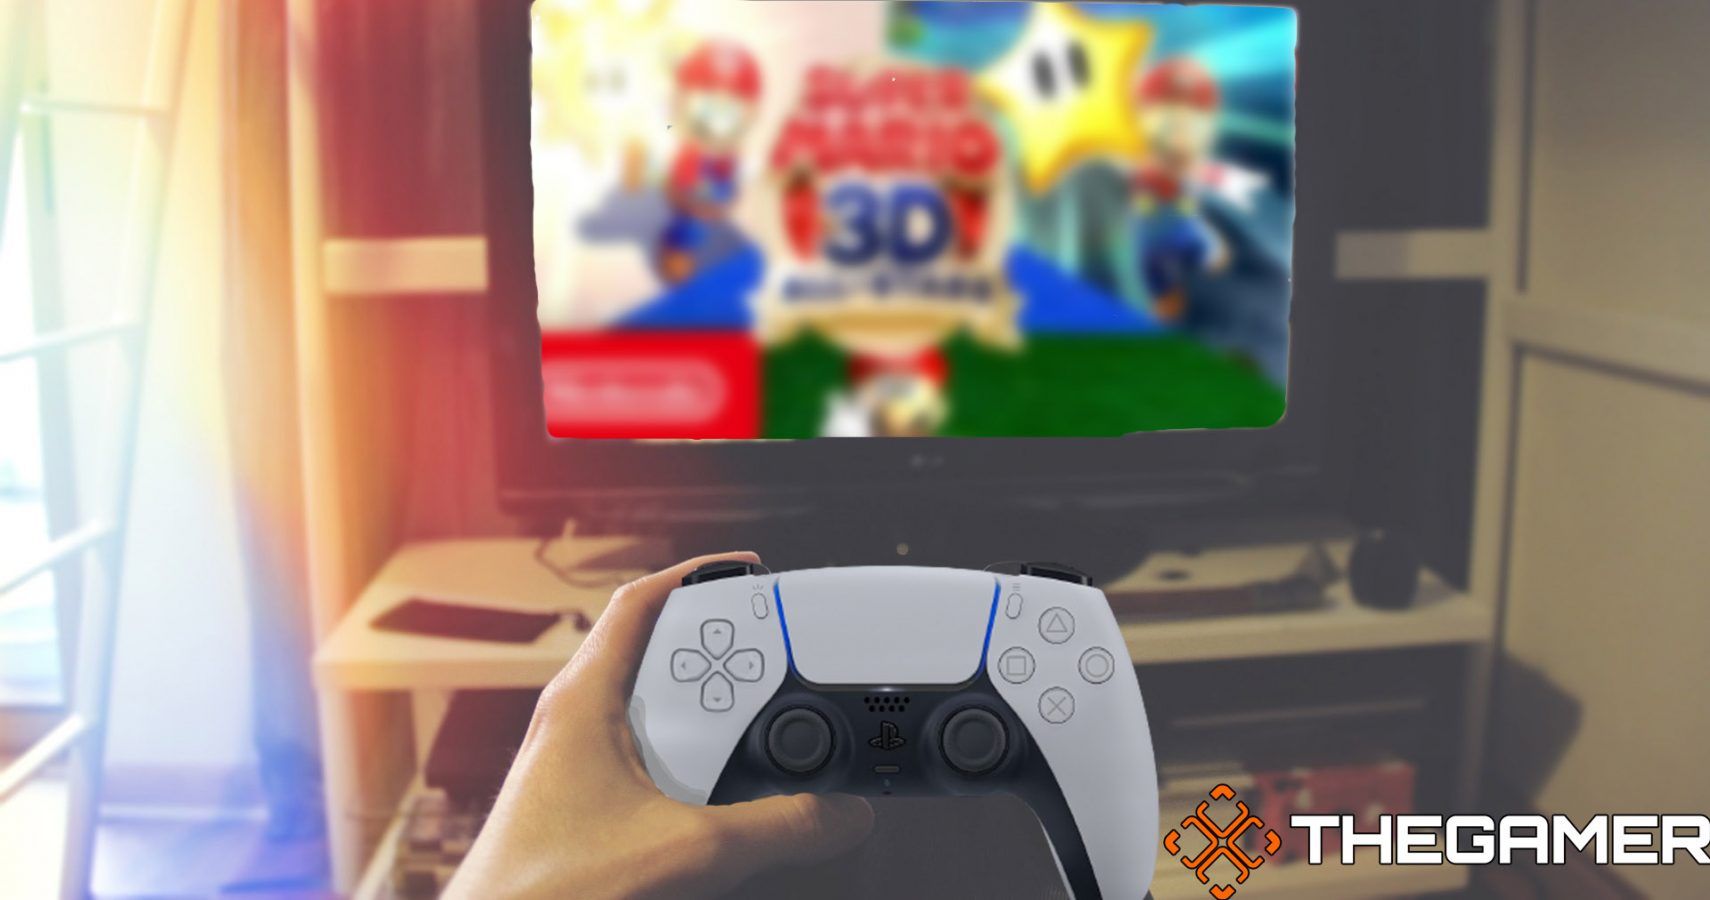 Stock Image from Pixabay featuring Super Mario 3D all stars and a DualSense Controller